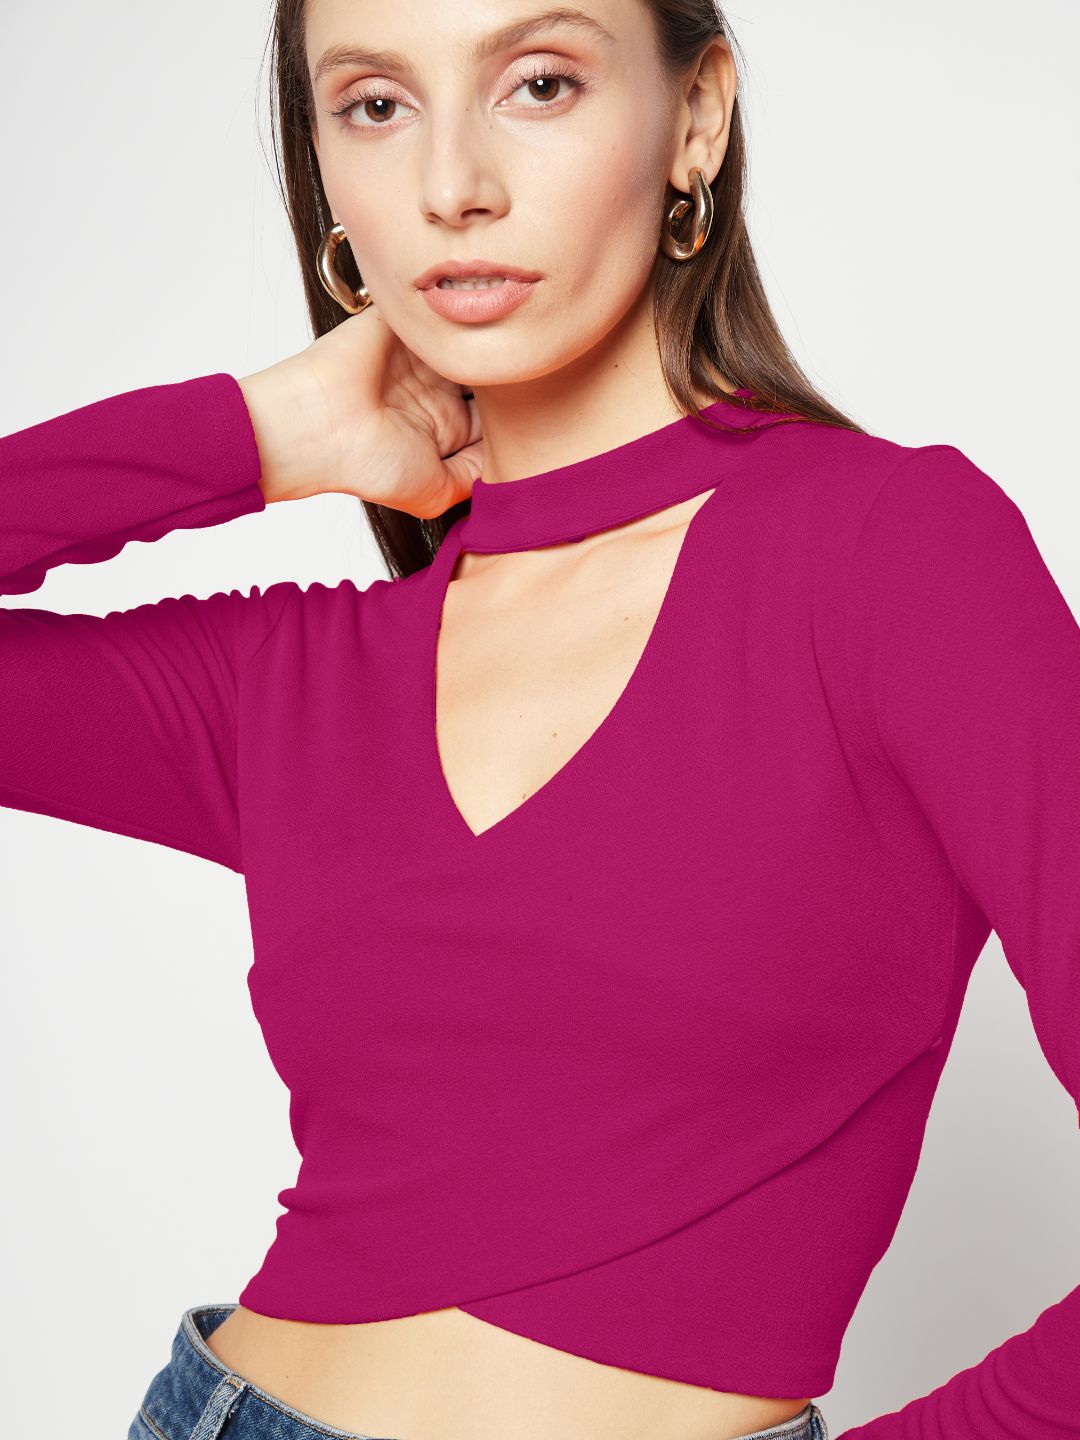 Stretchable Cotton Top With Criss Cross Detailing - Uptownie